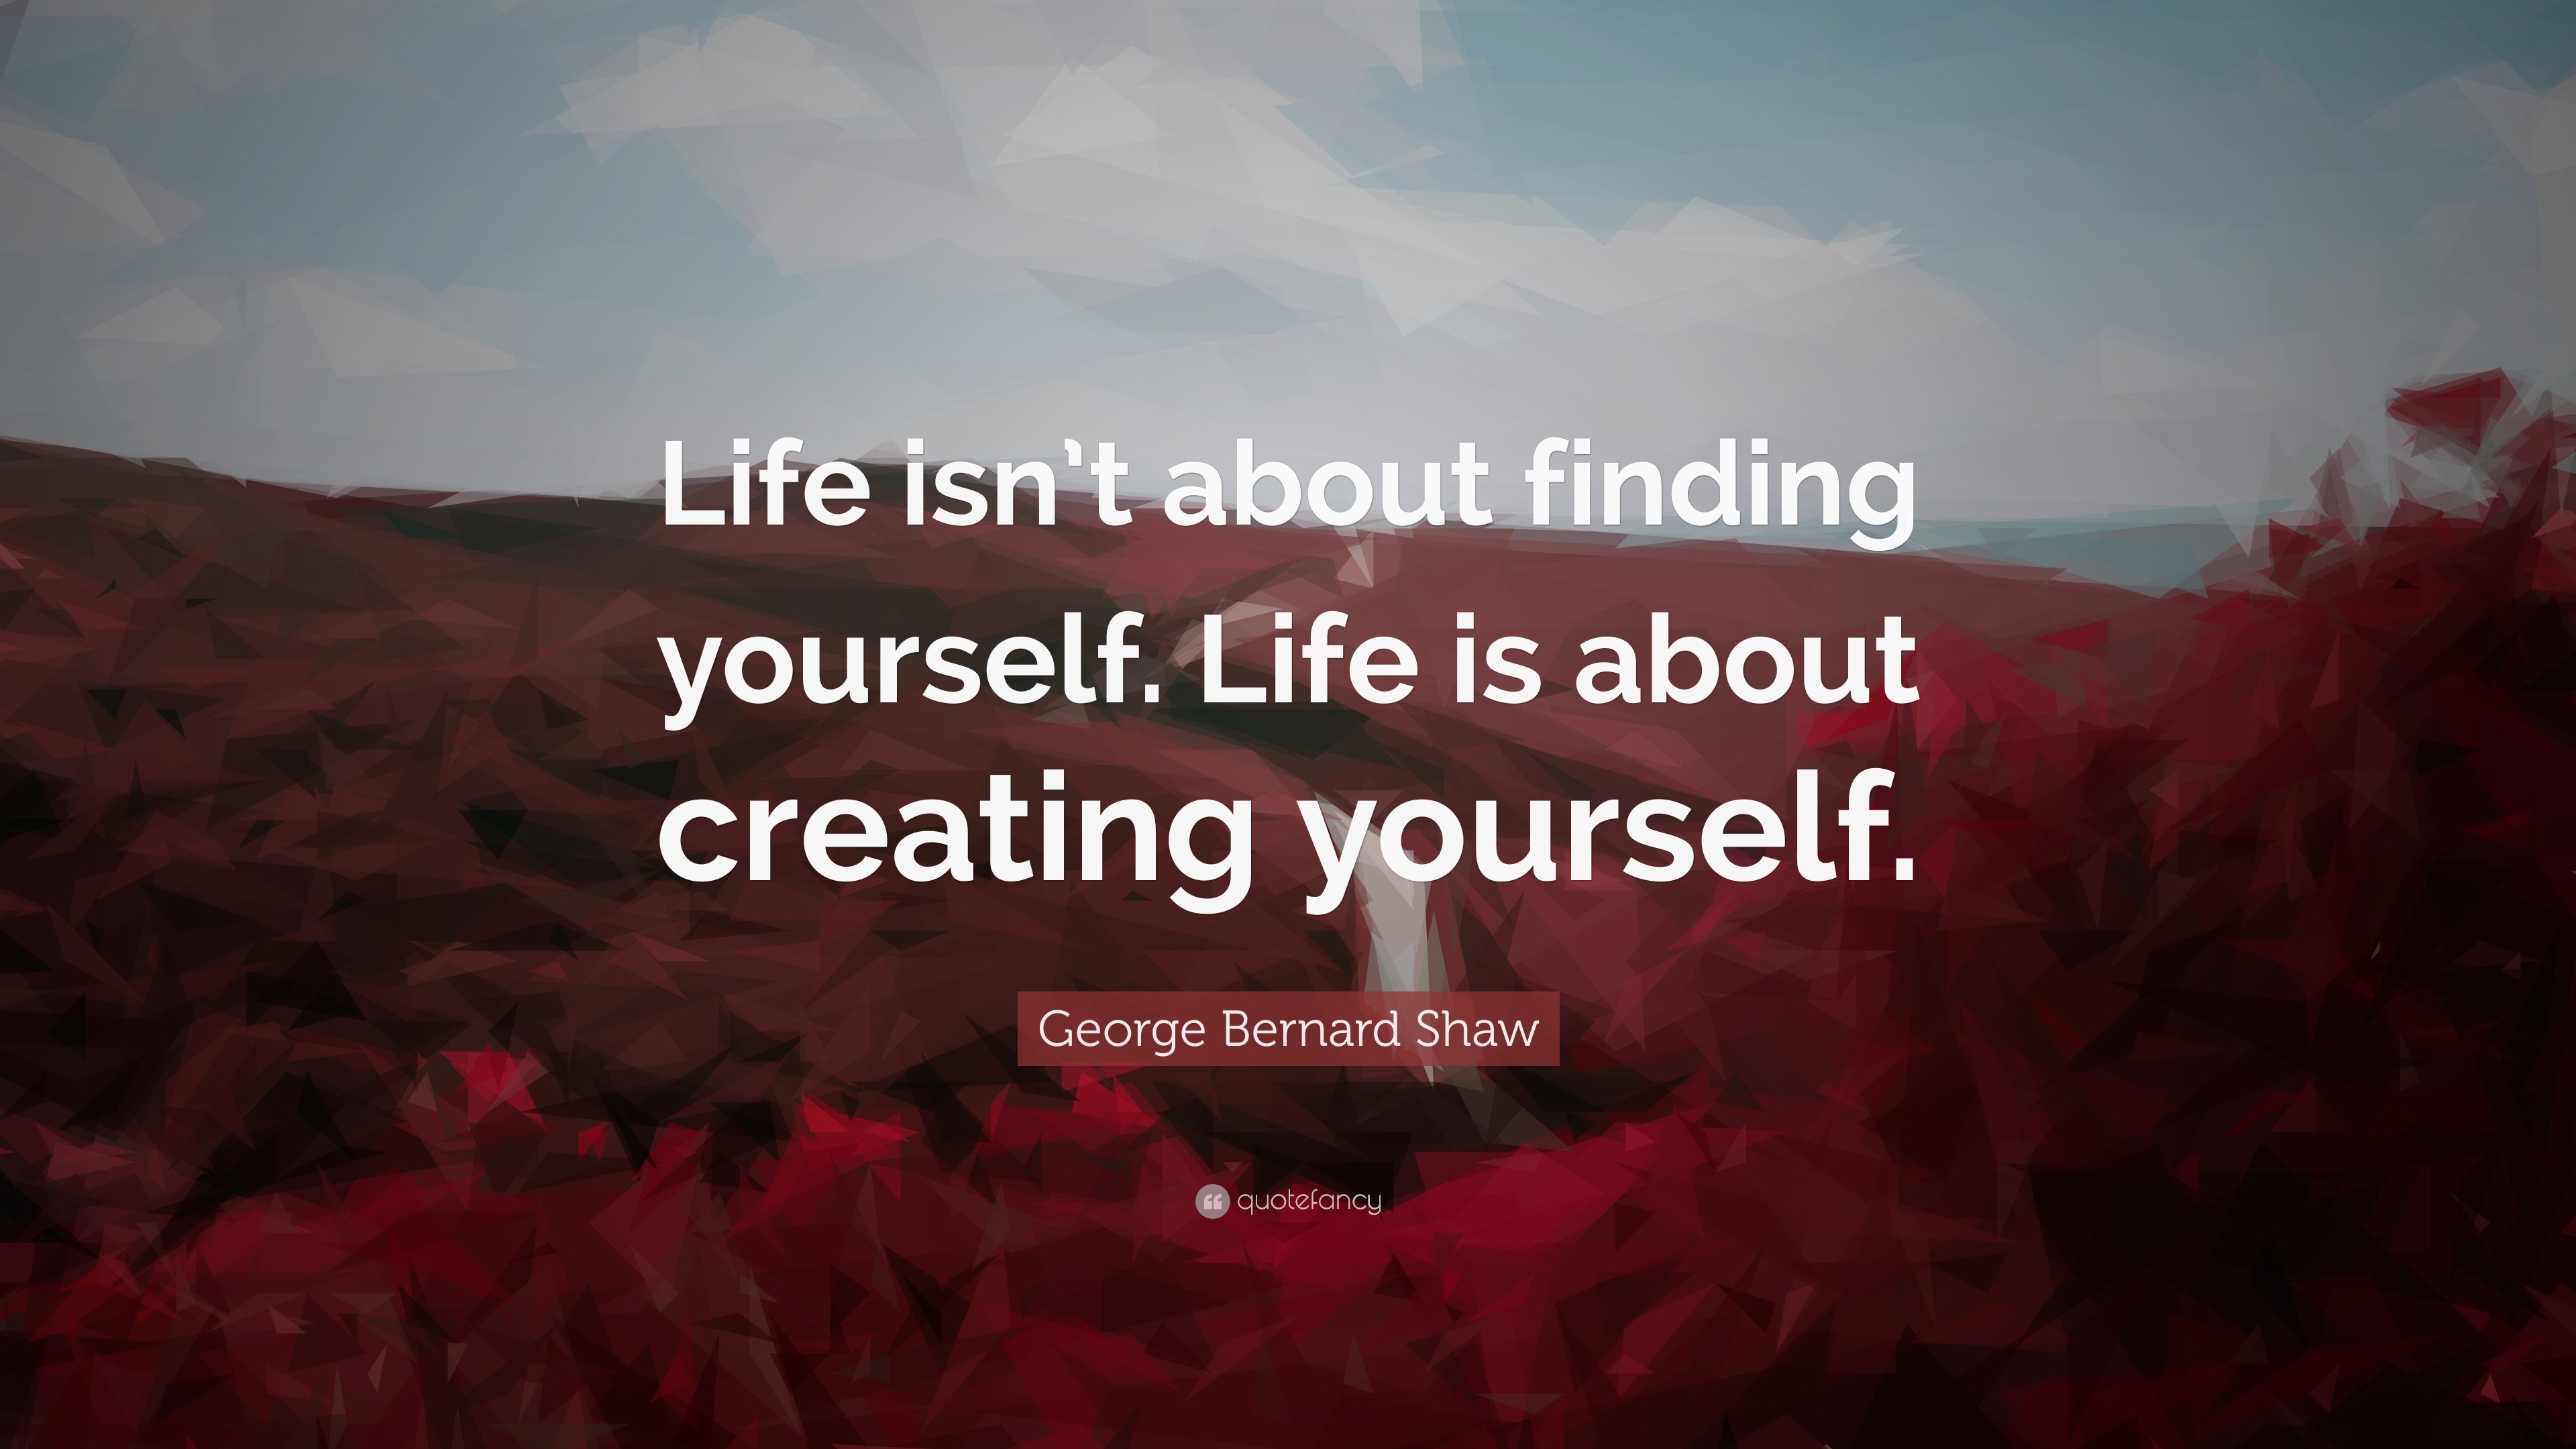 George Bernard Shaw Quote: “Life isn’t about finding yourself. Life is